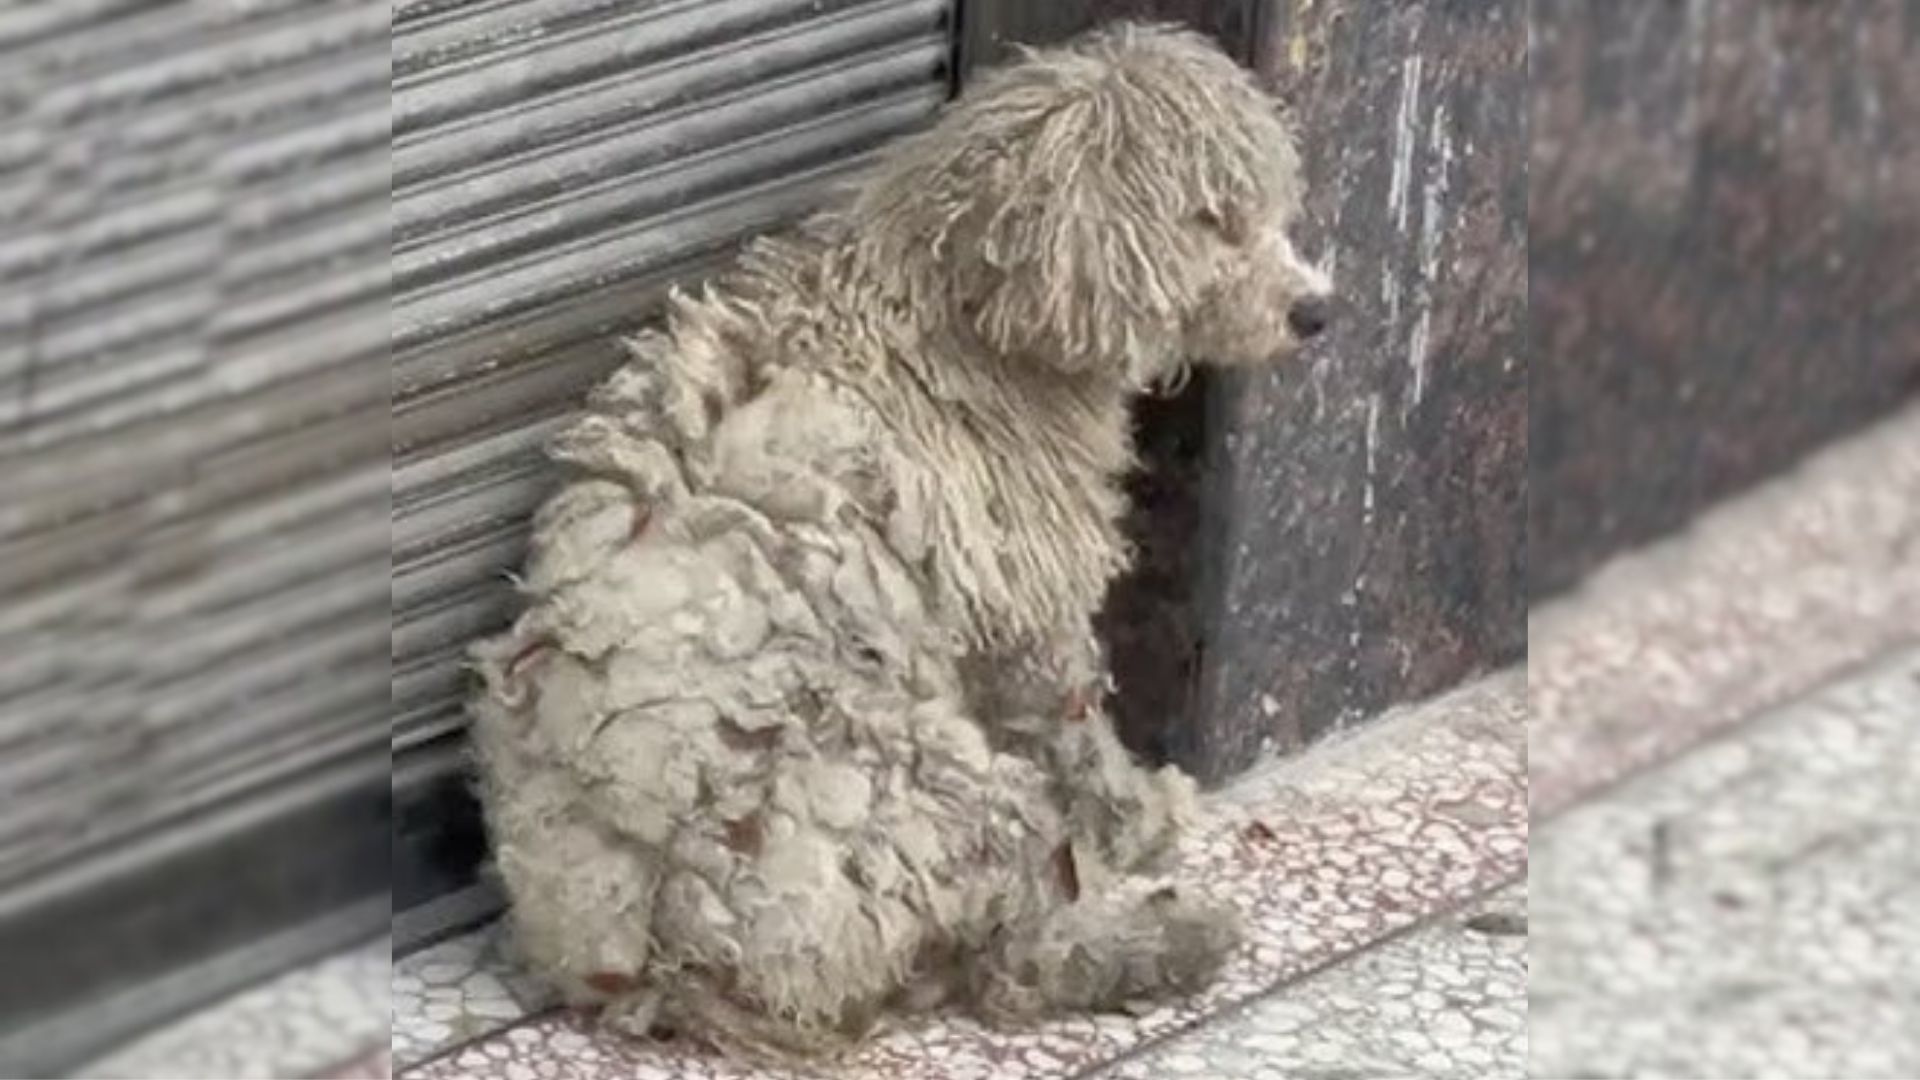 Kind Person Noticed This Shivering Dog Struggling On Her Own And Decided To Help Her